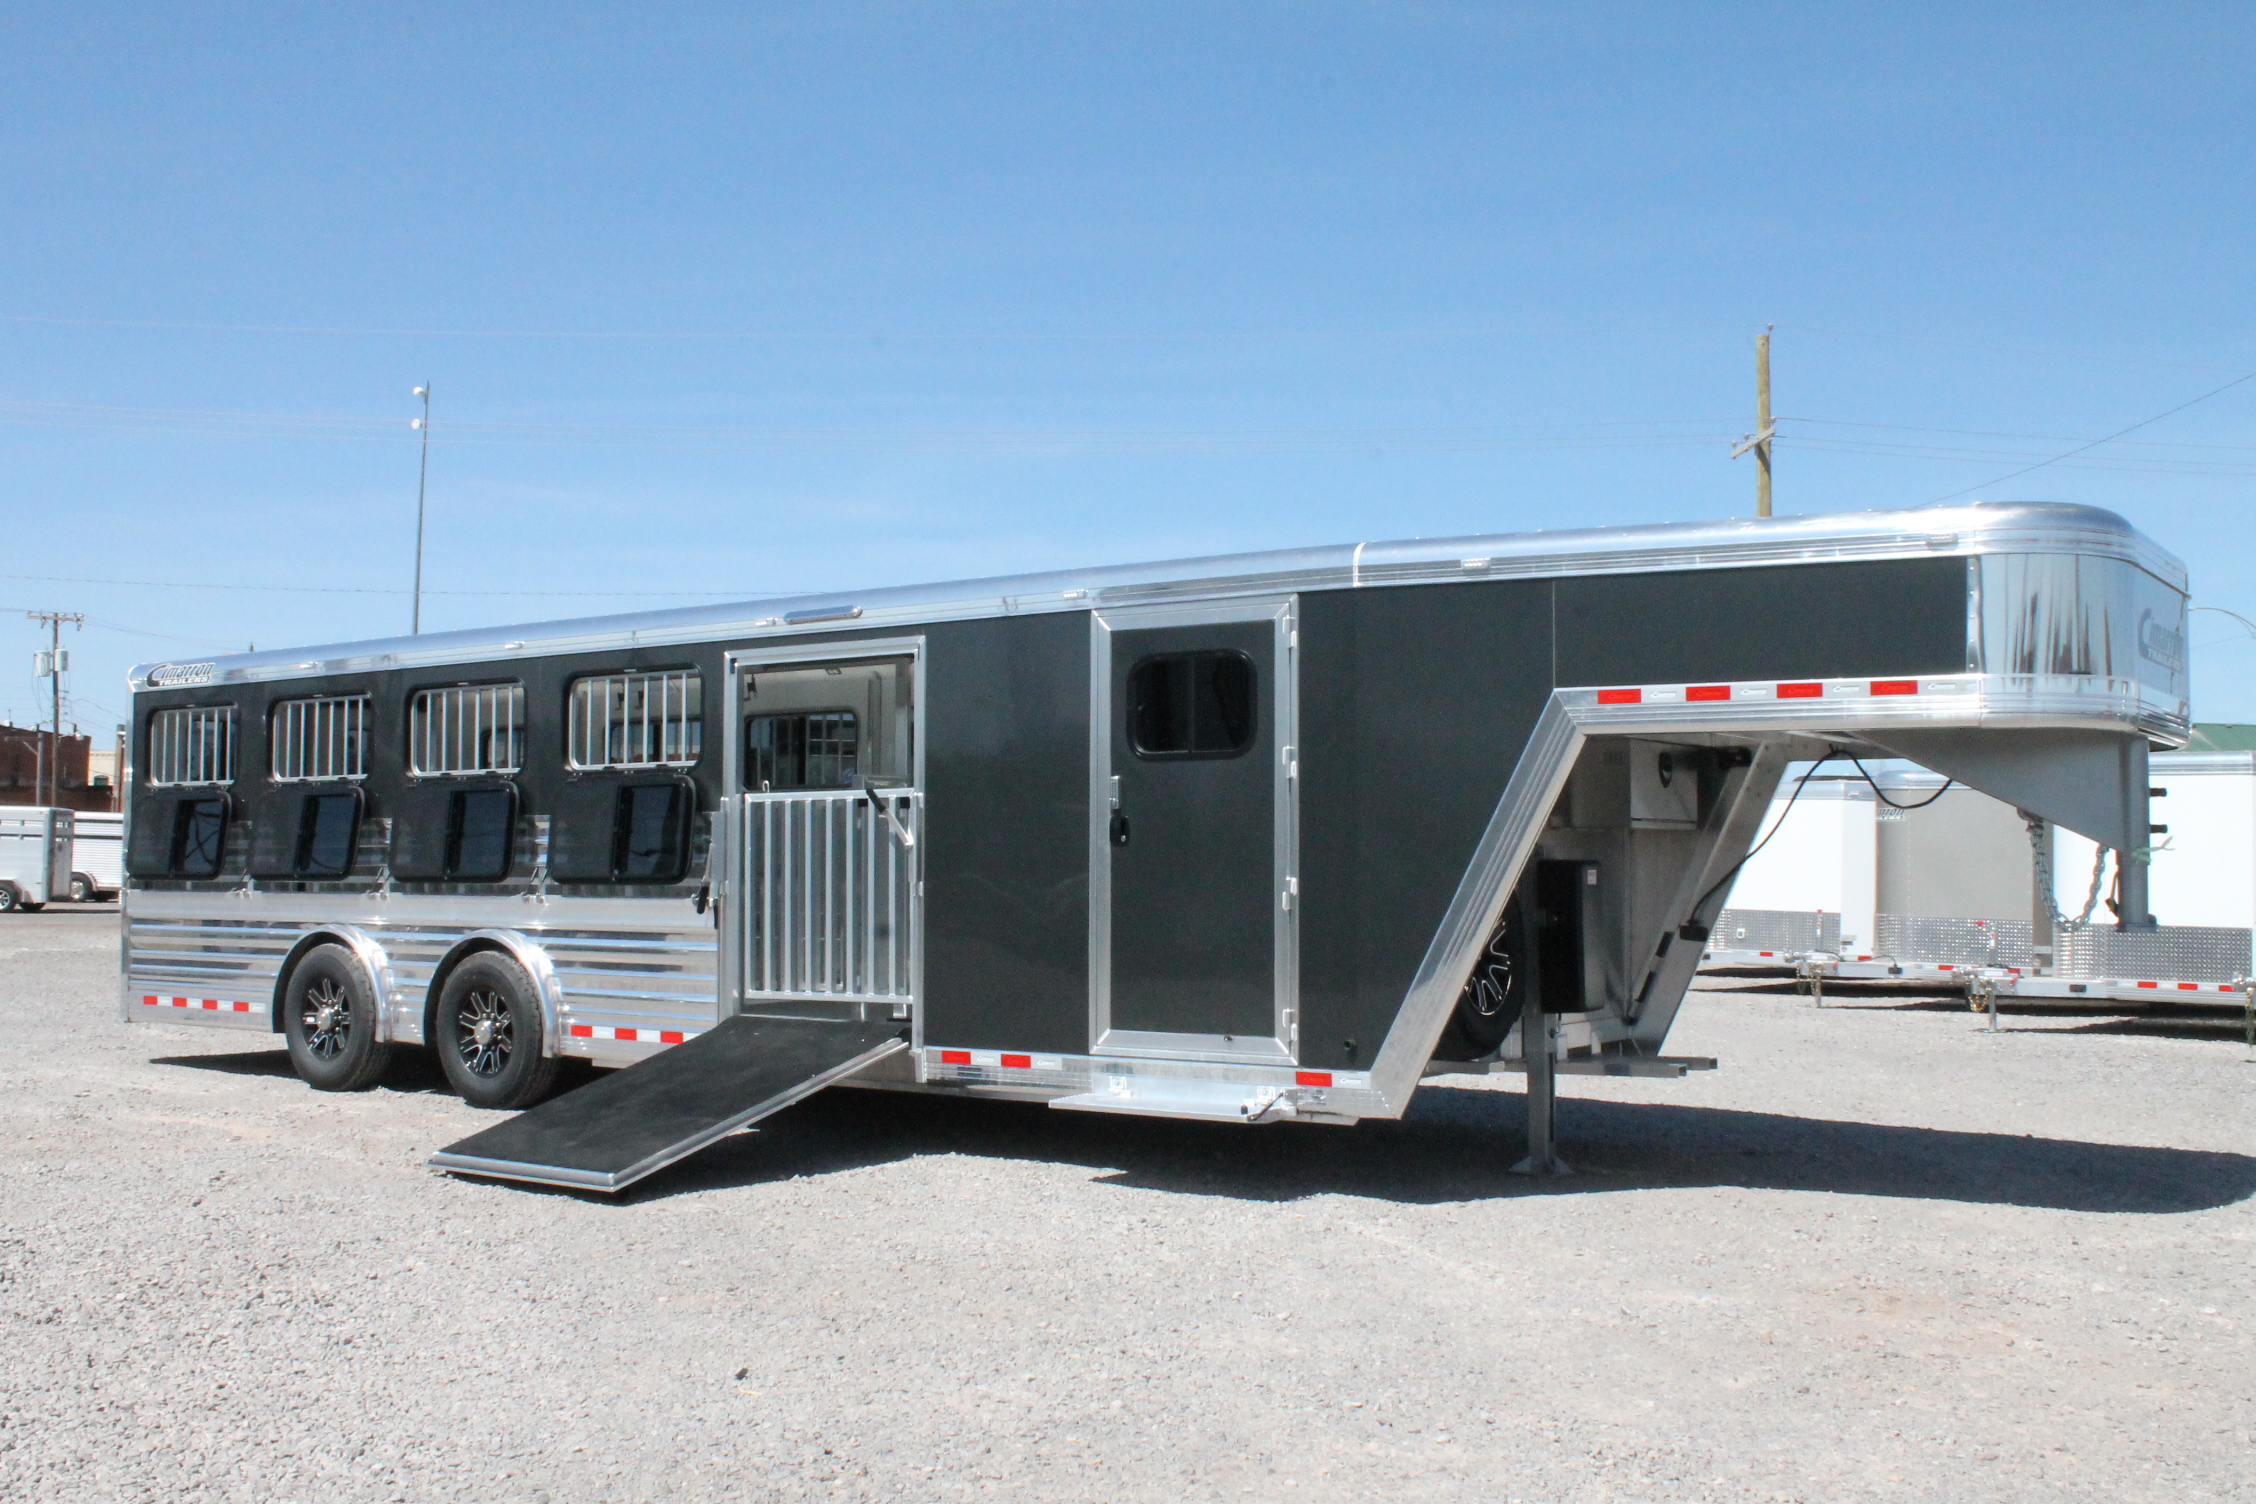 A Cimarron trailer parked in a gravel lot on a sunny day.